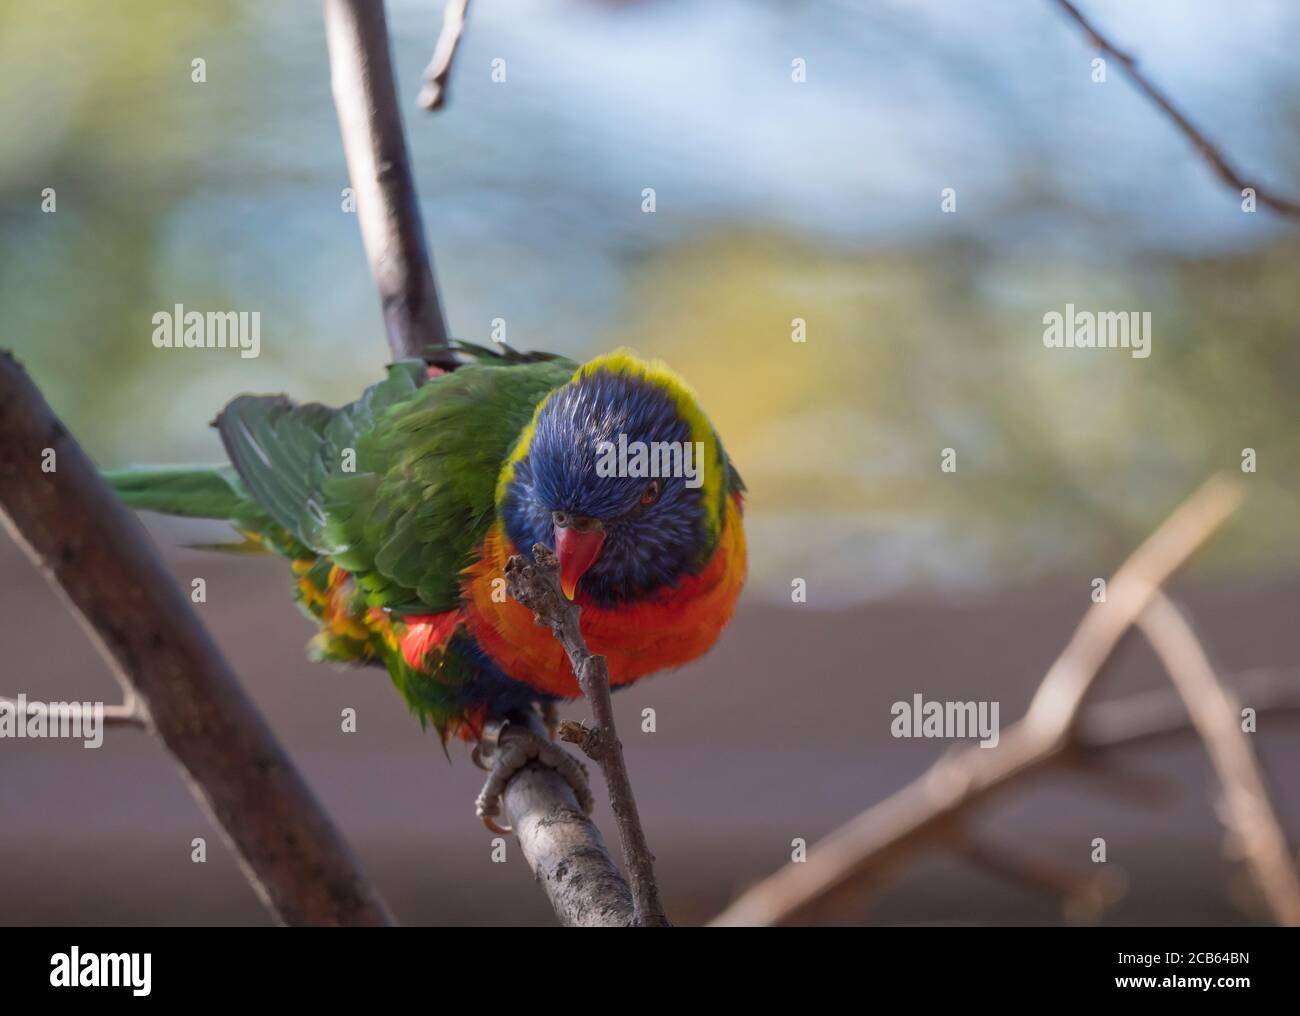 Close up exotic colorful red blue green parrot Rainbow lorikeet, Trichoglossus moluccanus, sitting on the tree branch Stock Photo